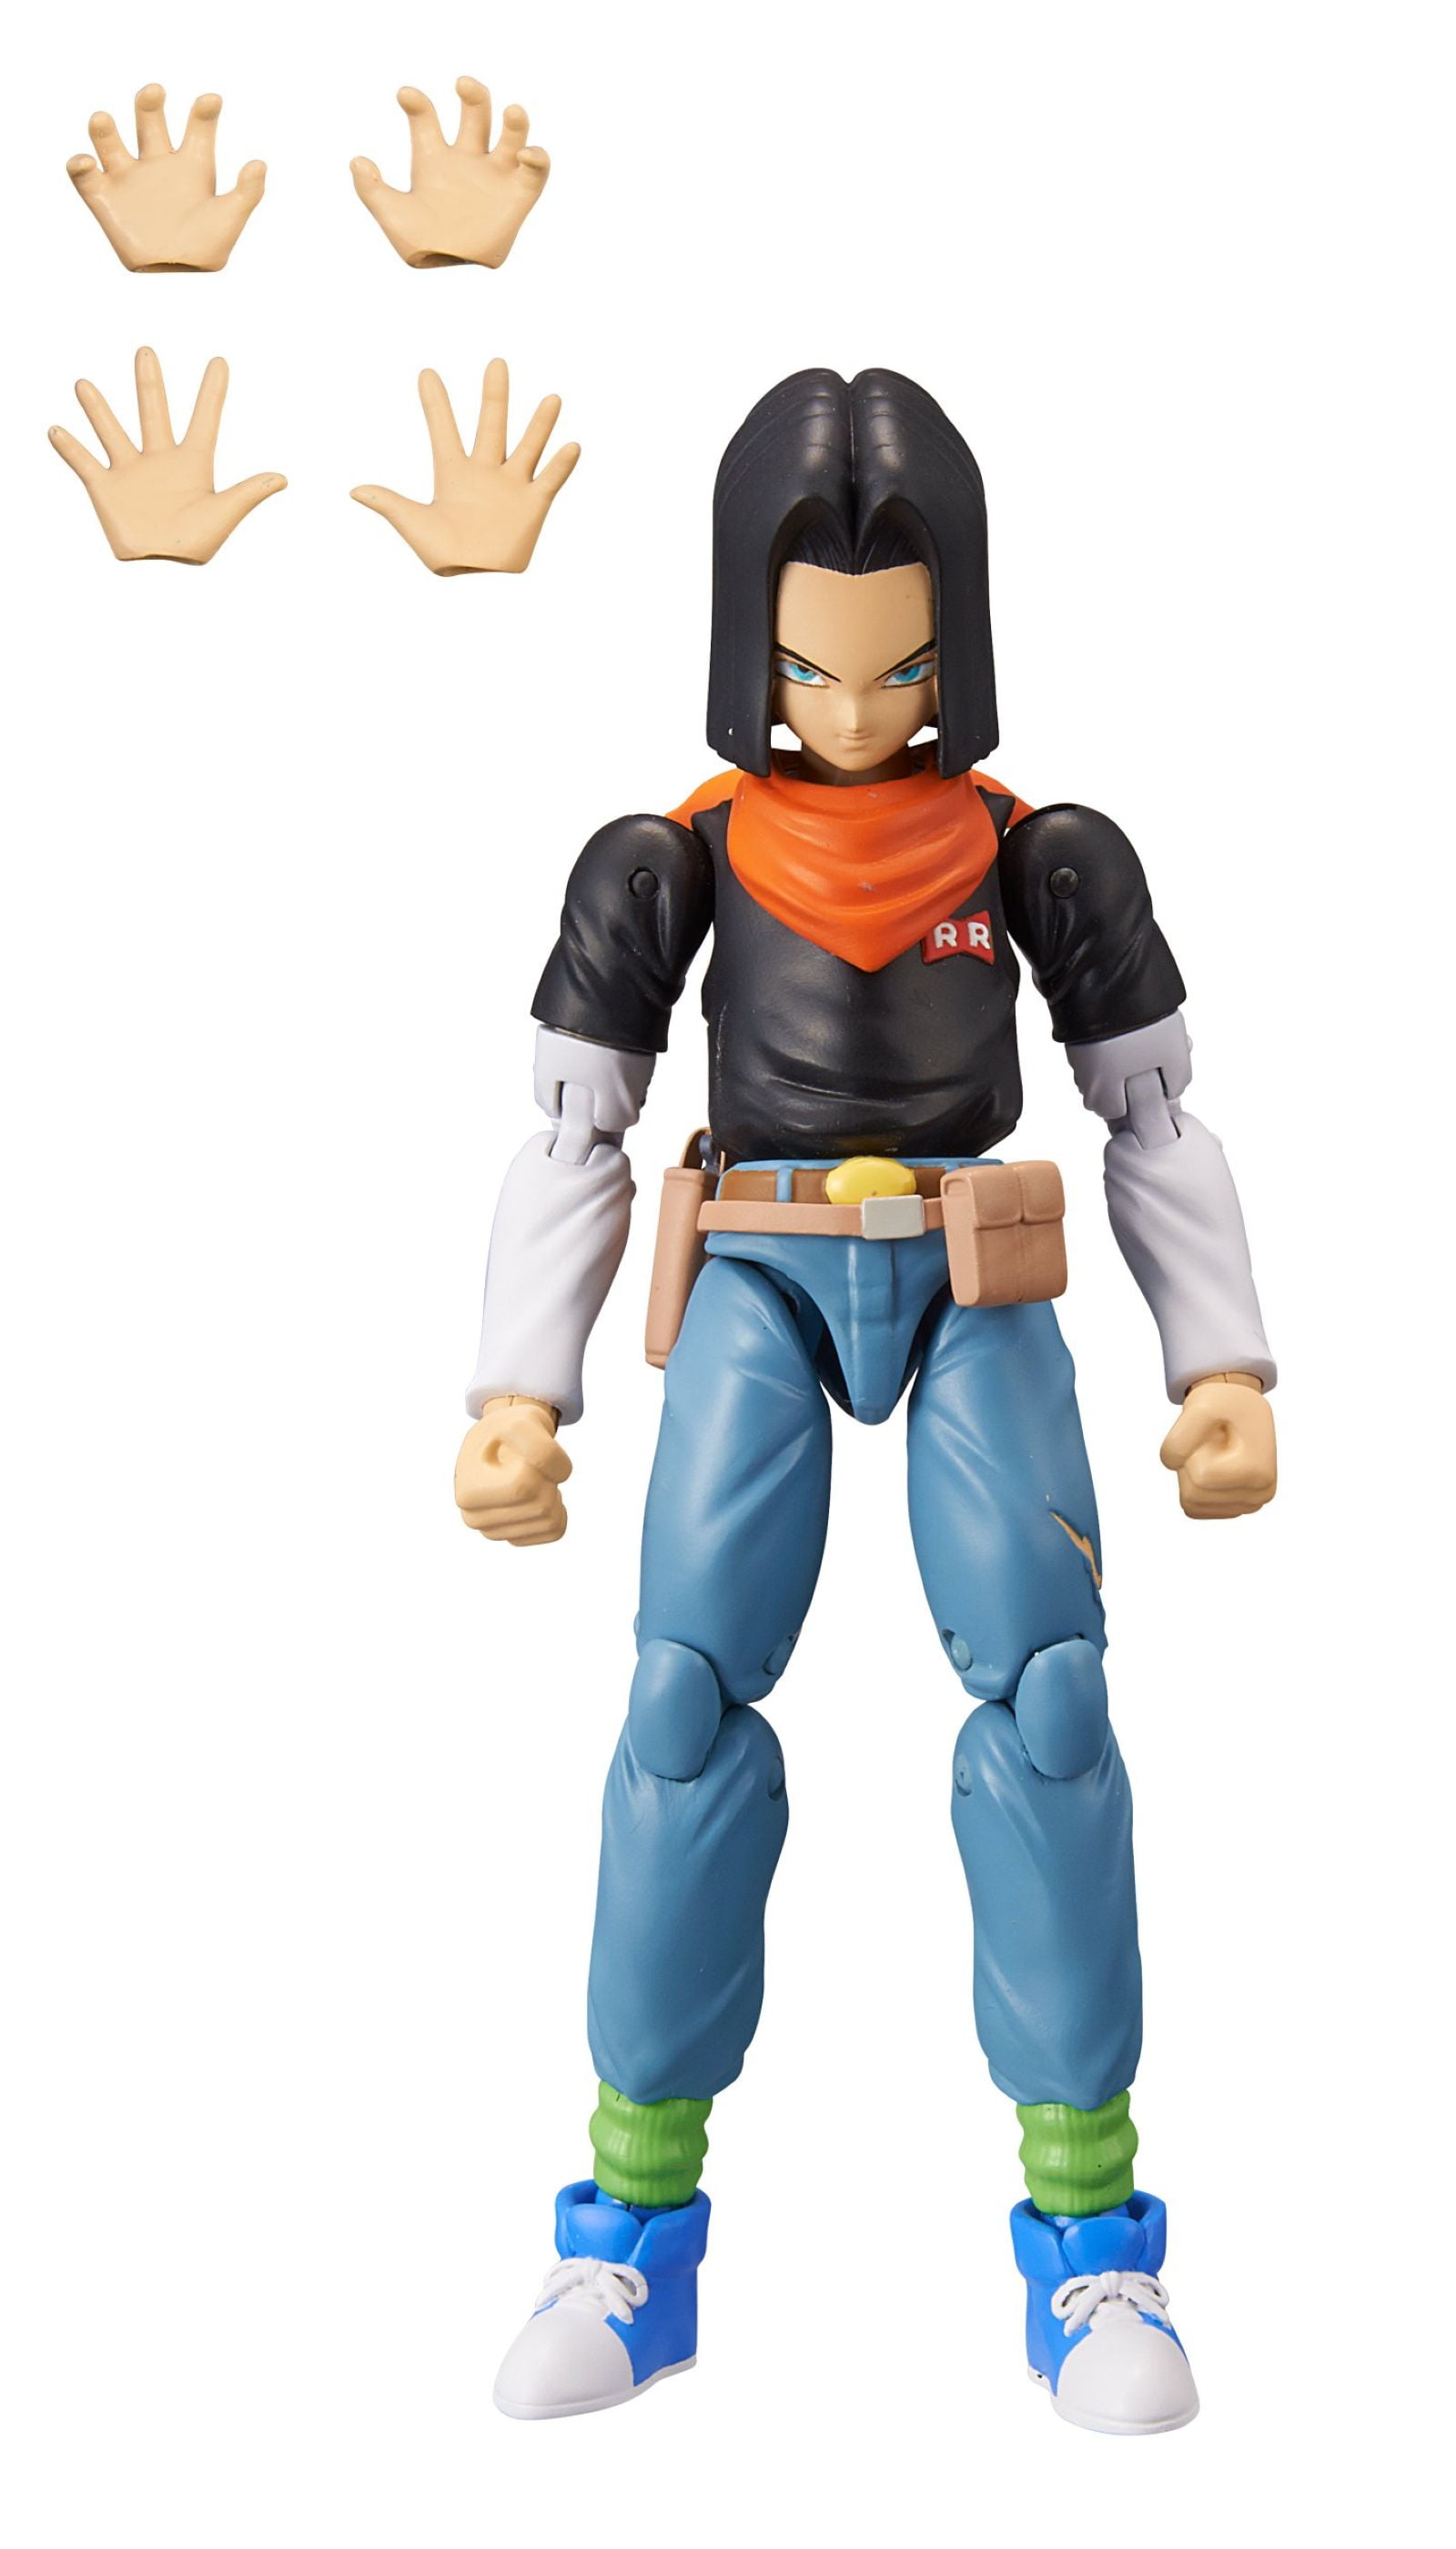 Bandai Dragon Ball Stars Super Android 18 Action Figure Series 12 for sale online 